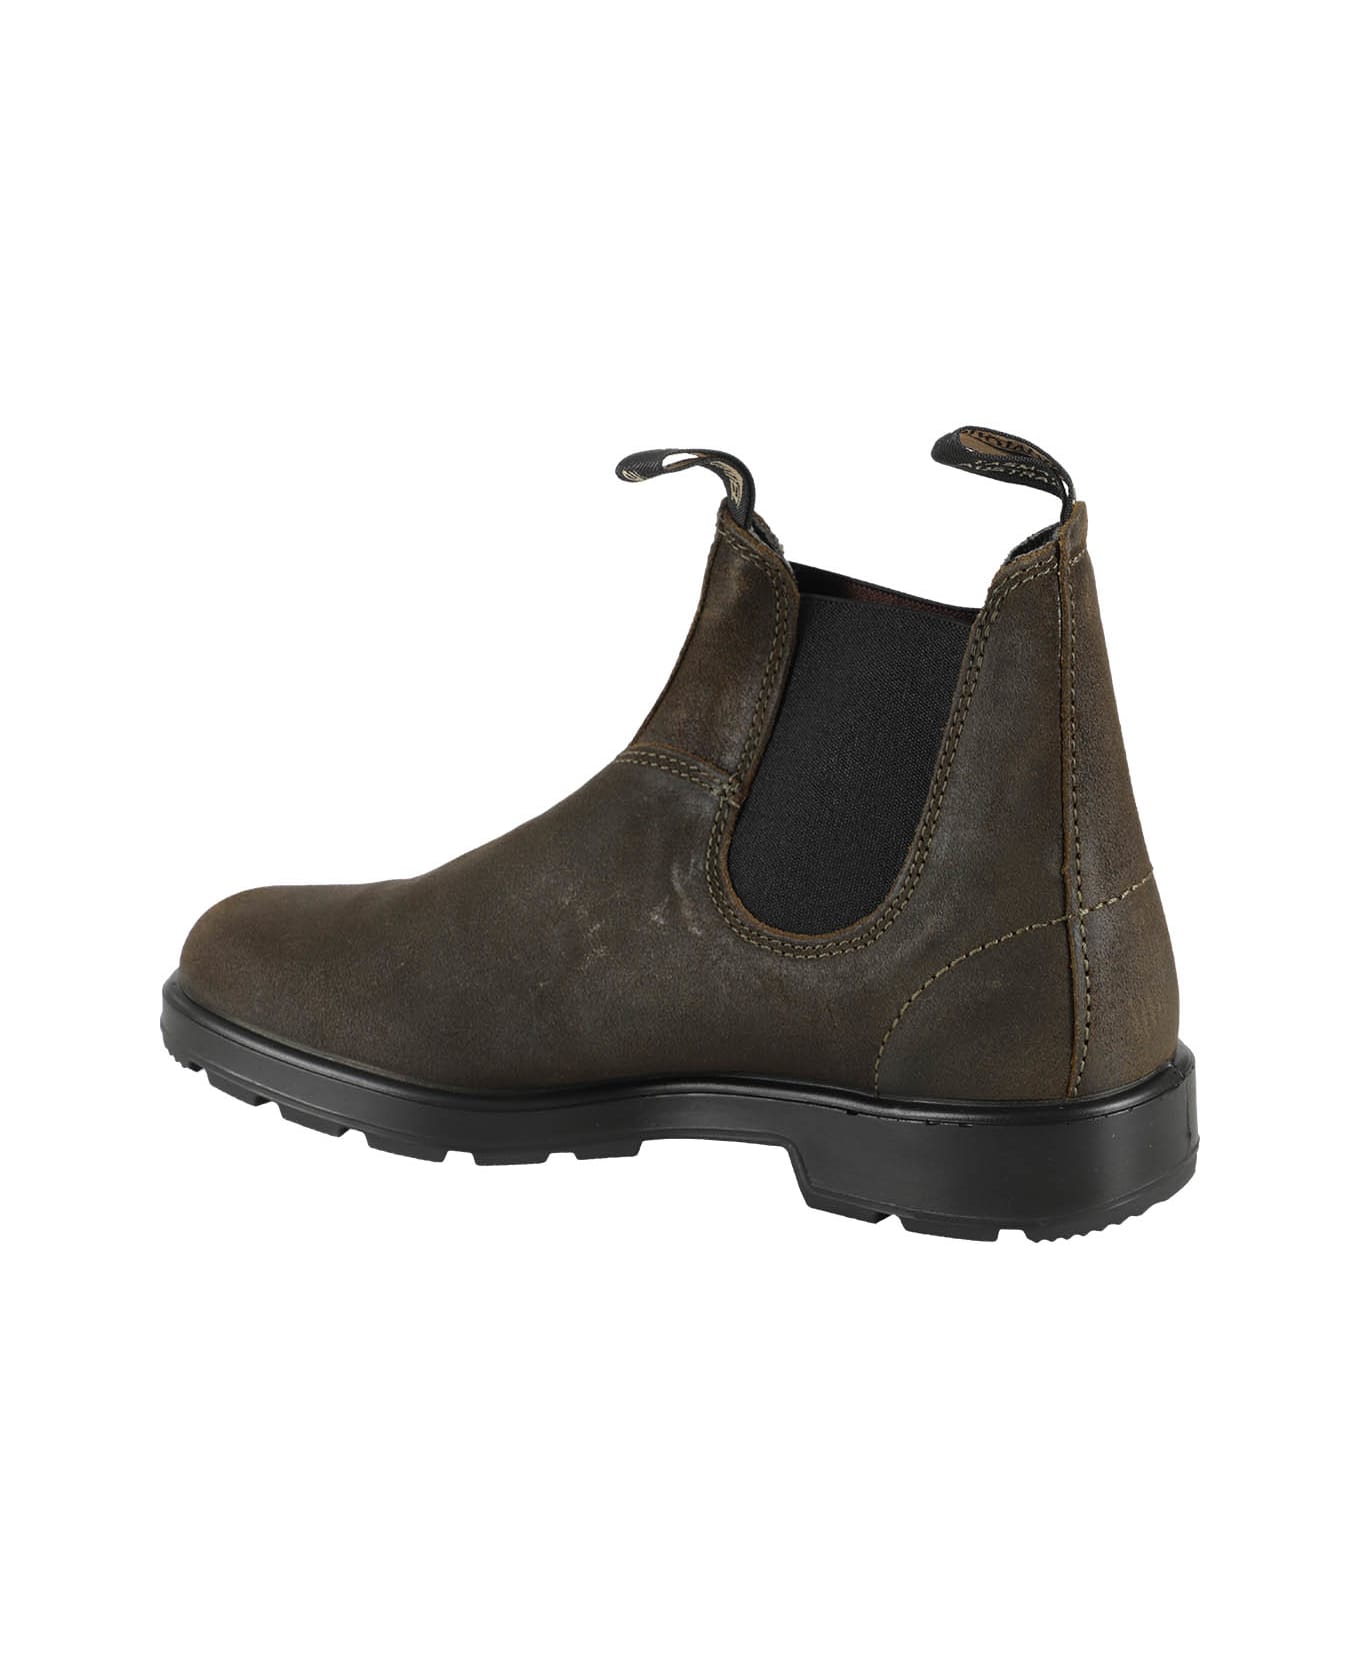 Blundstone Waxed Suede - Low boots Chaussures Taille 39